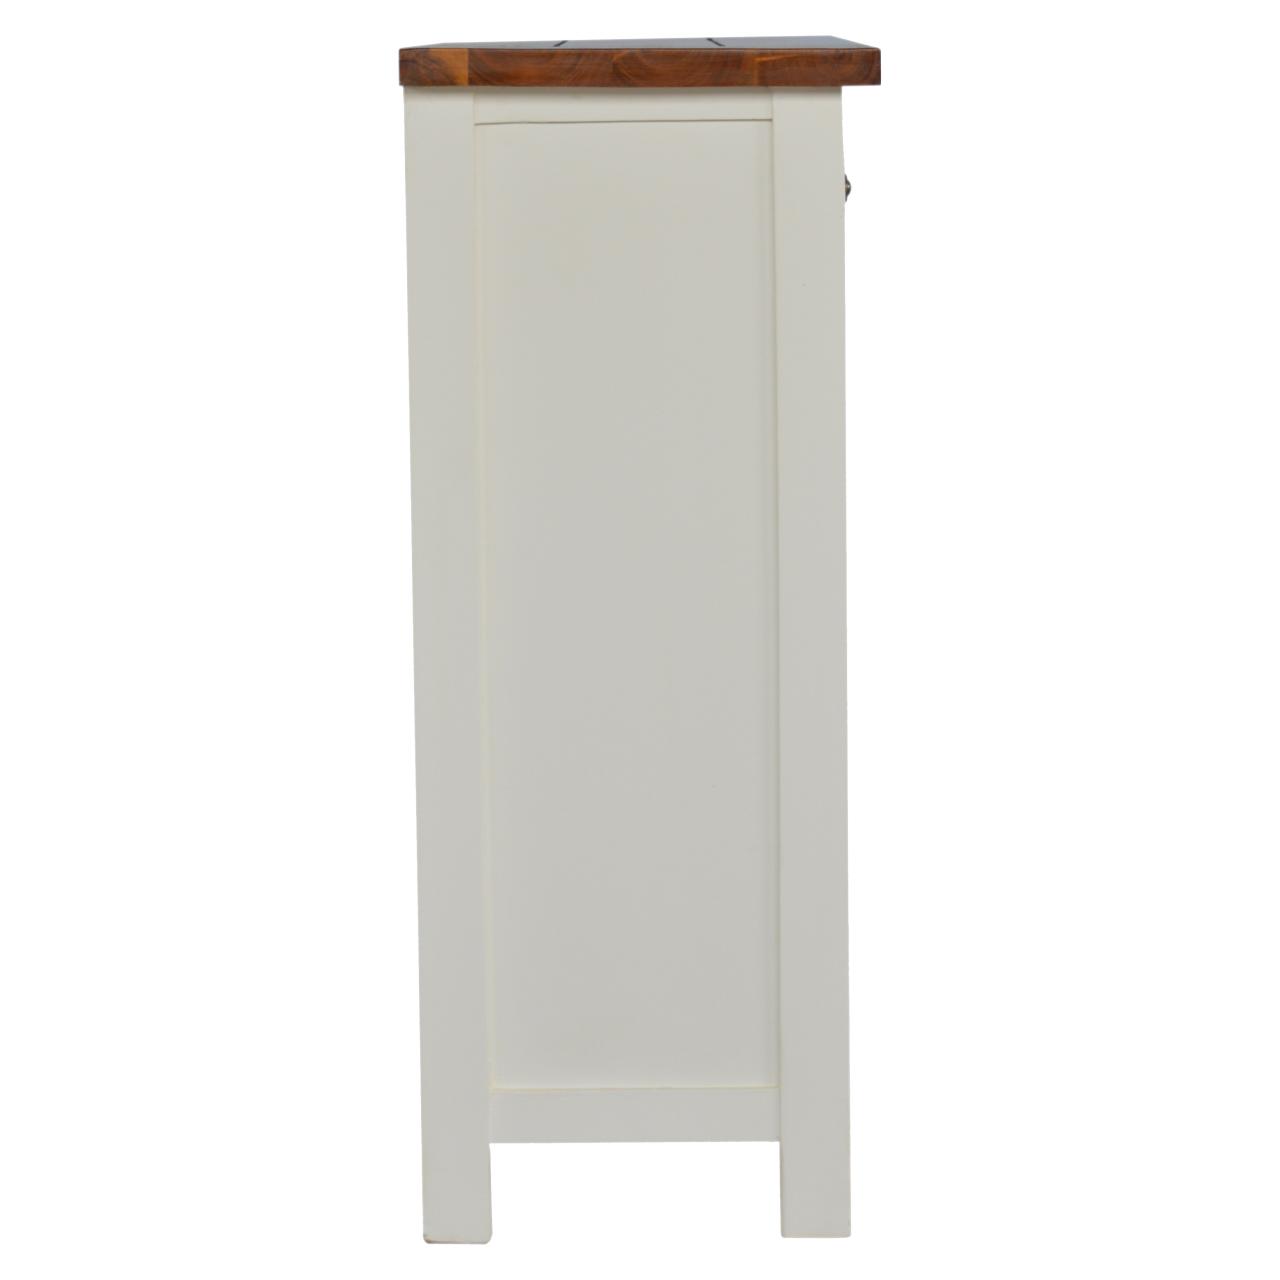 Country Two Tone Cabinet